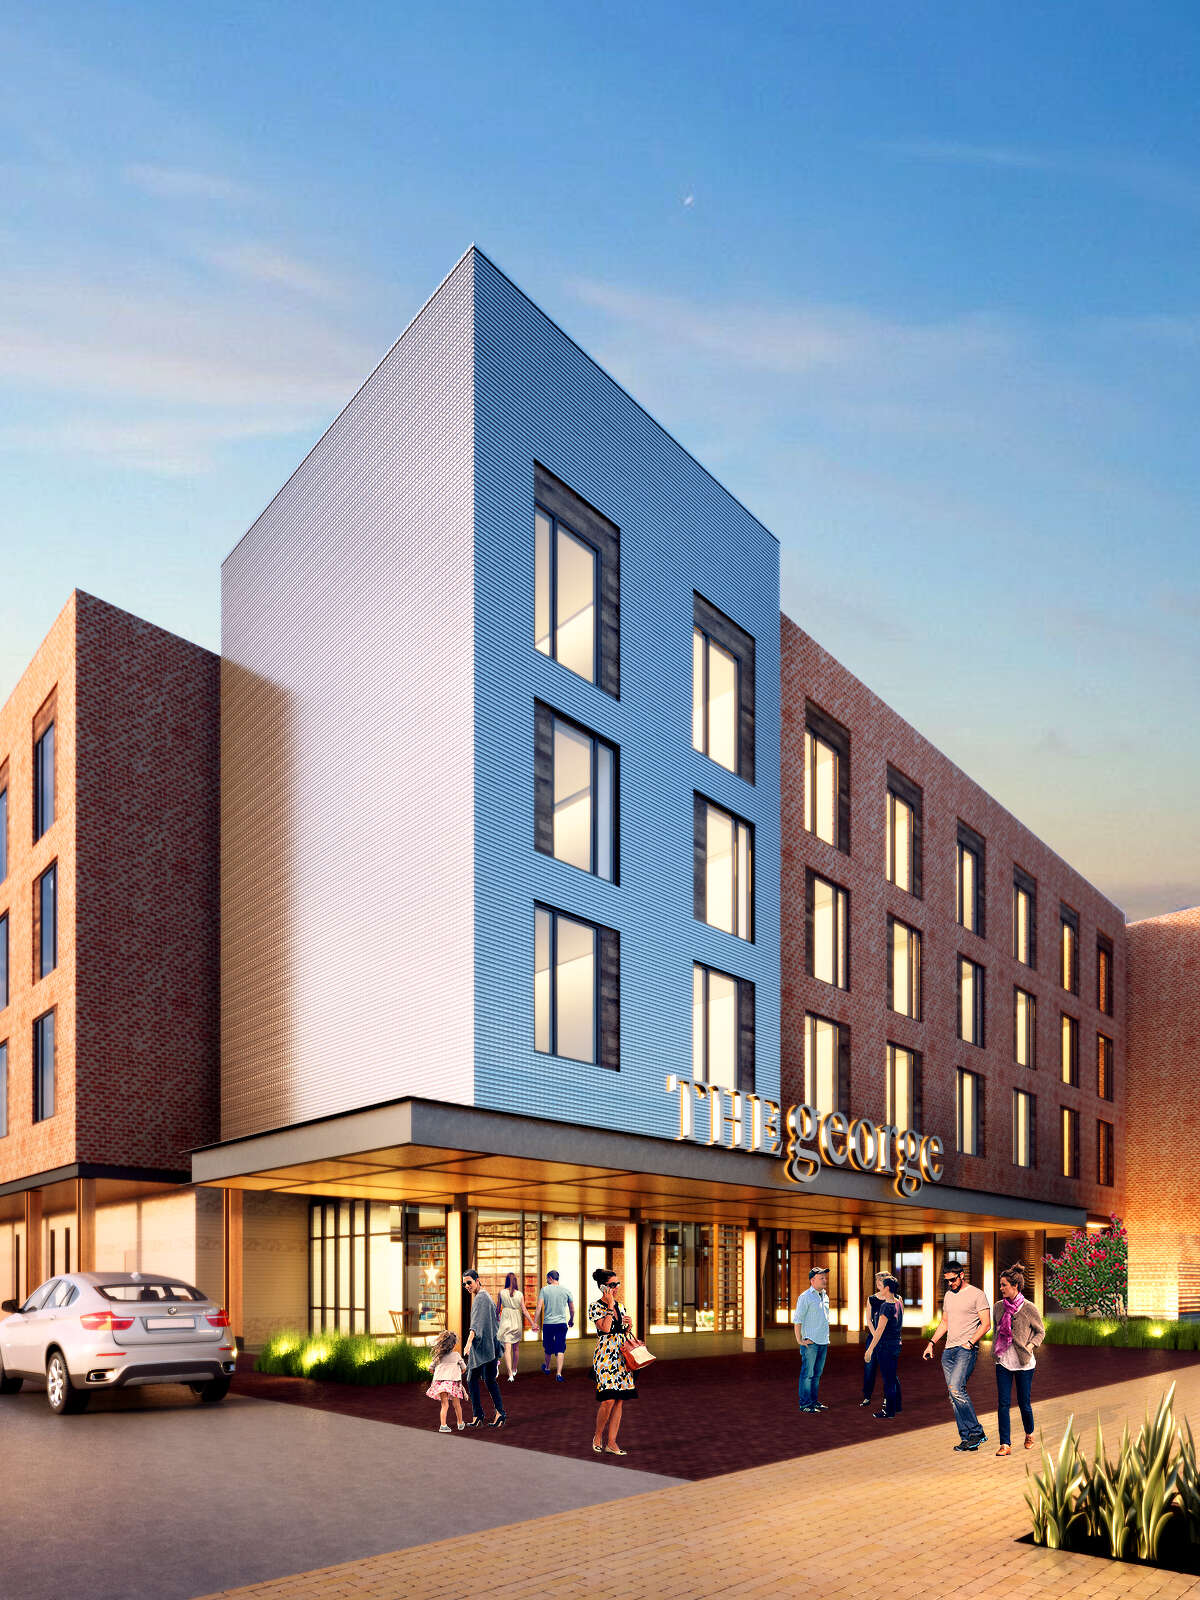 The George Hotel will open in August in Century Square at Texas A&M University.